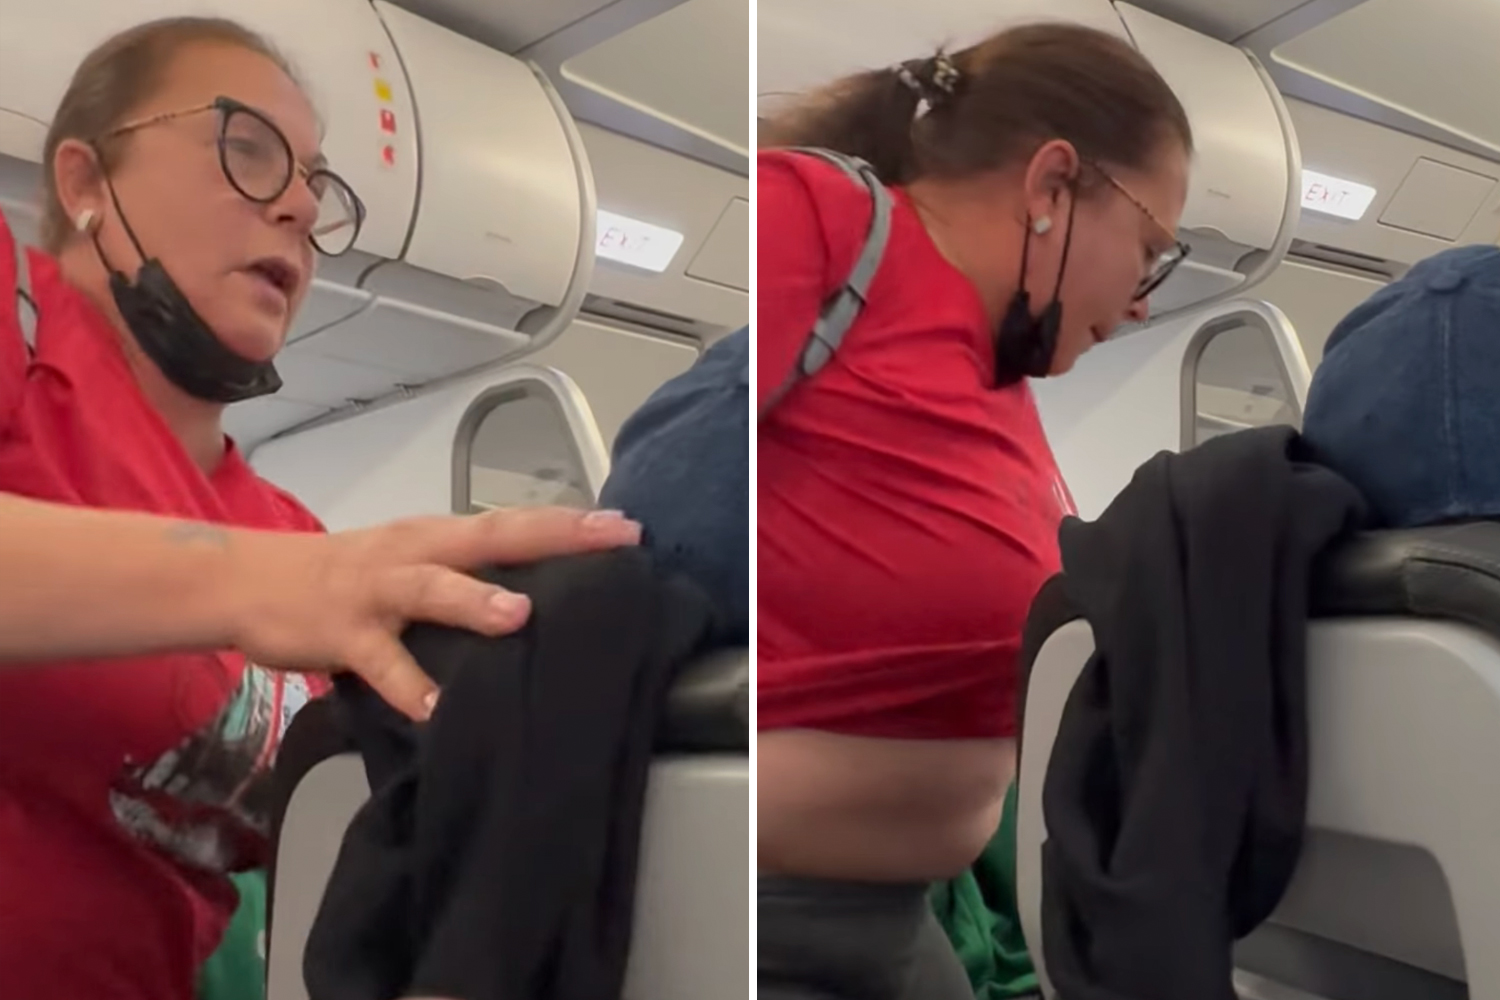 passenger-threatens-to-pee-in-airplane-aisle-pulls-down-pants-and-squats